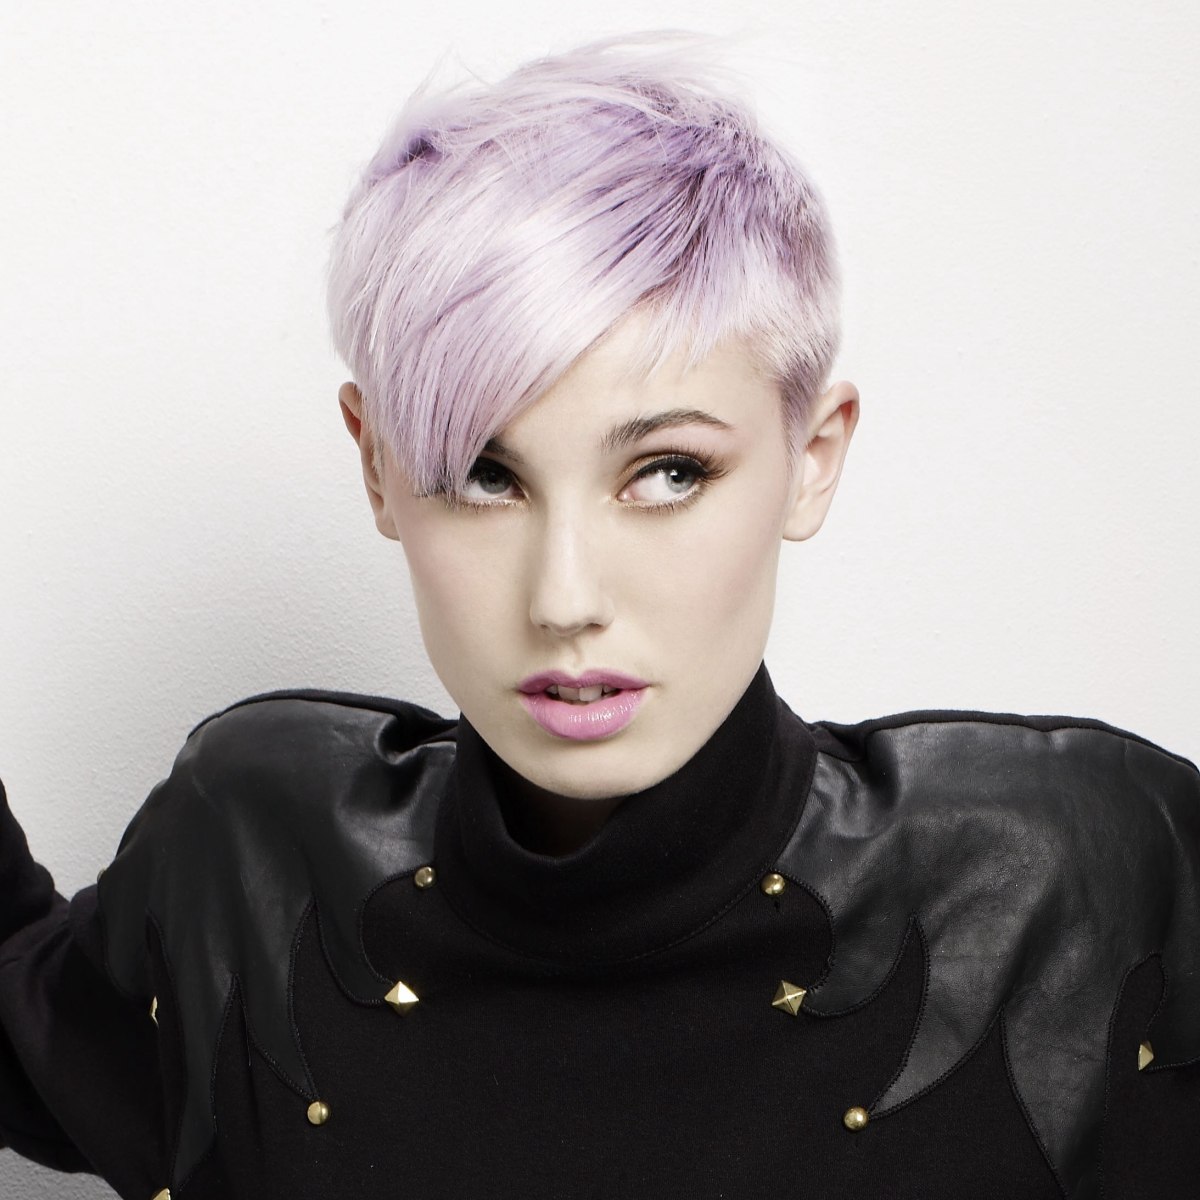 Modern short haircut with cropped sides and purple shades